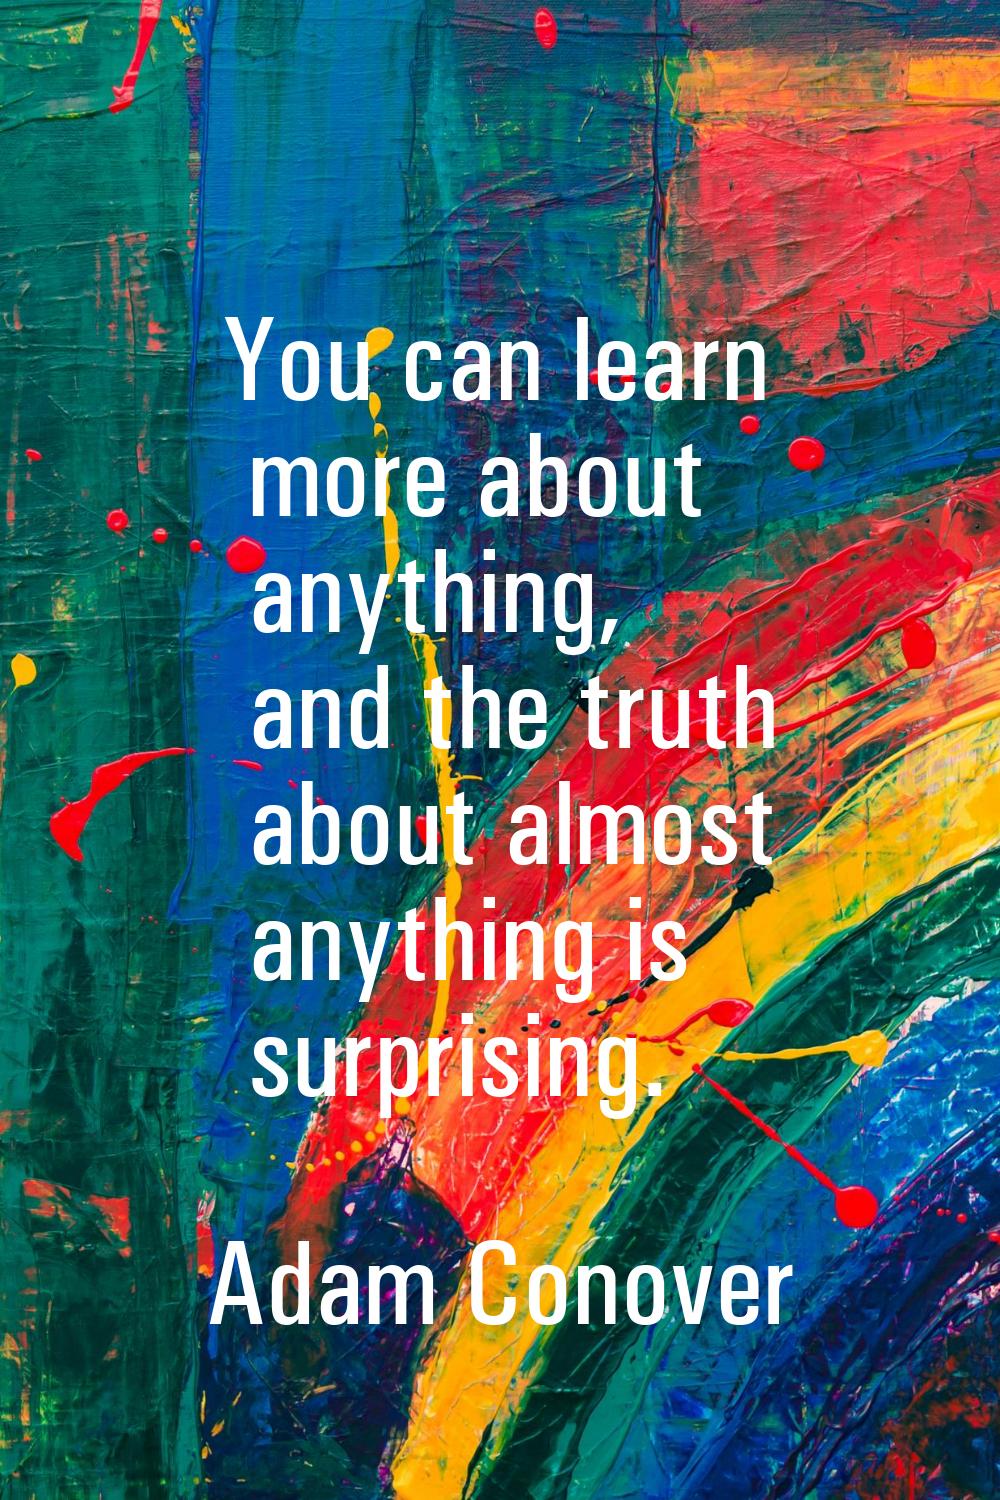 You can learn more about anything, and the truth about almost anything is surprising.